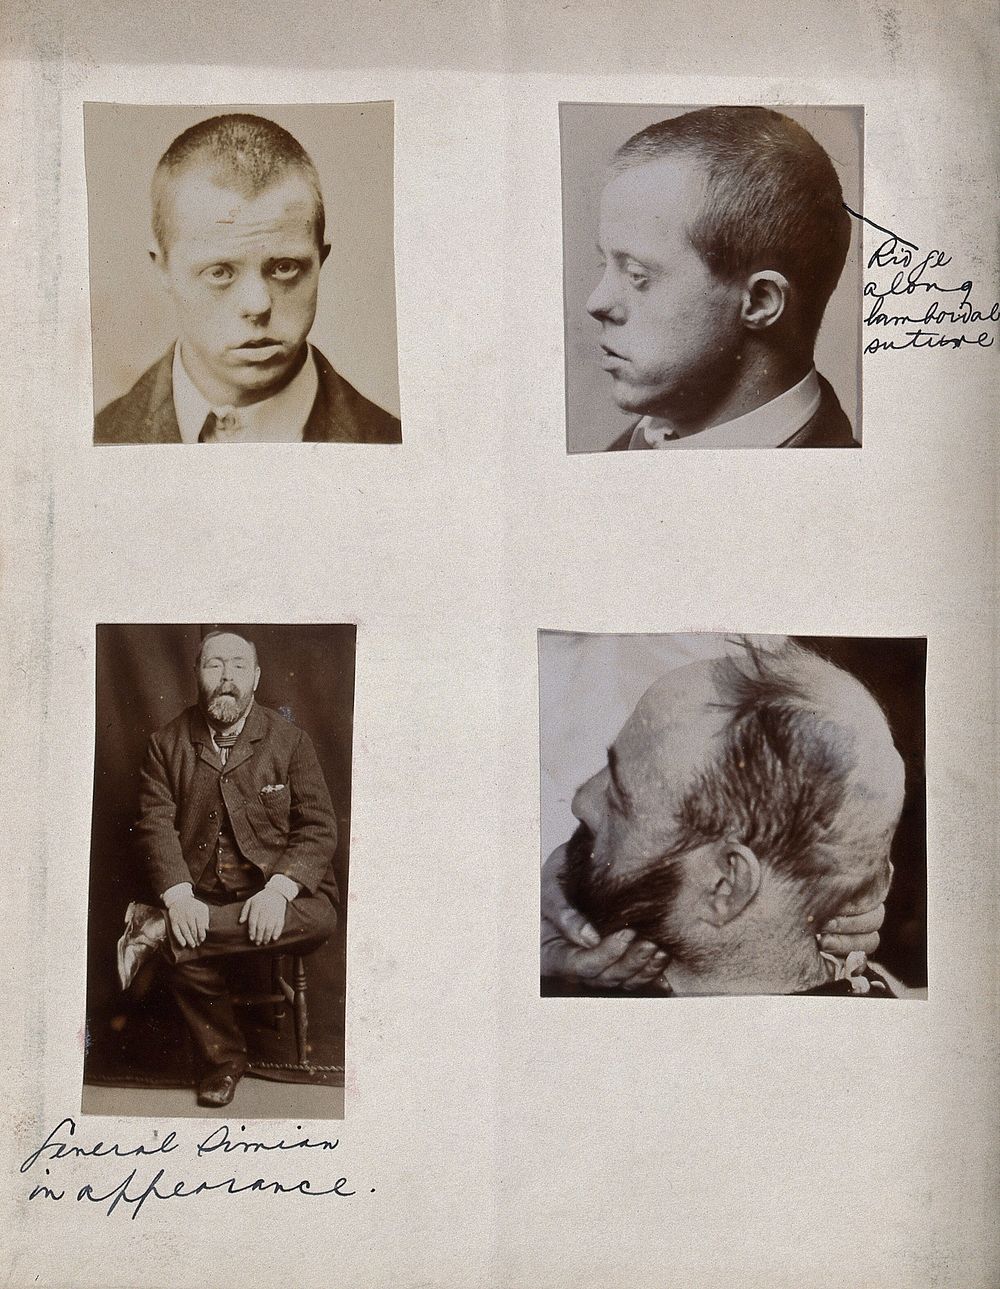 Down's syndrome: seen in two views of a man's head. Two photographs.